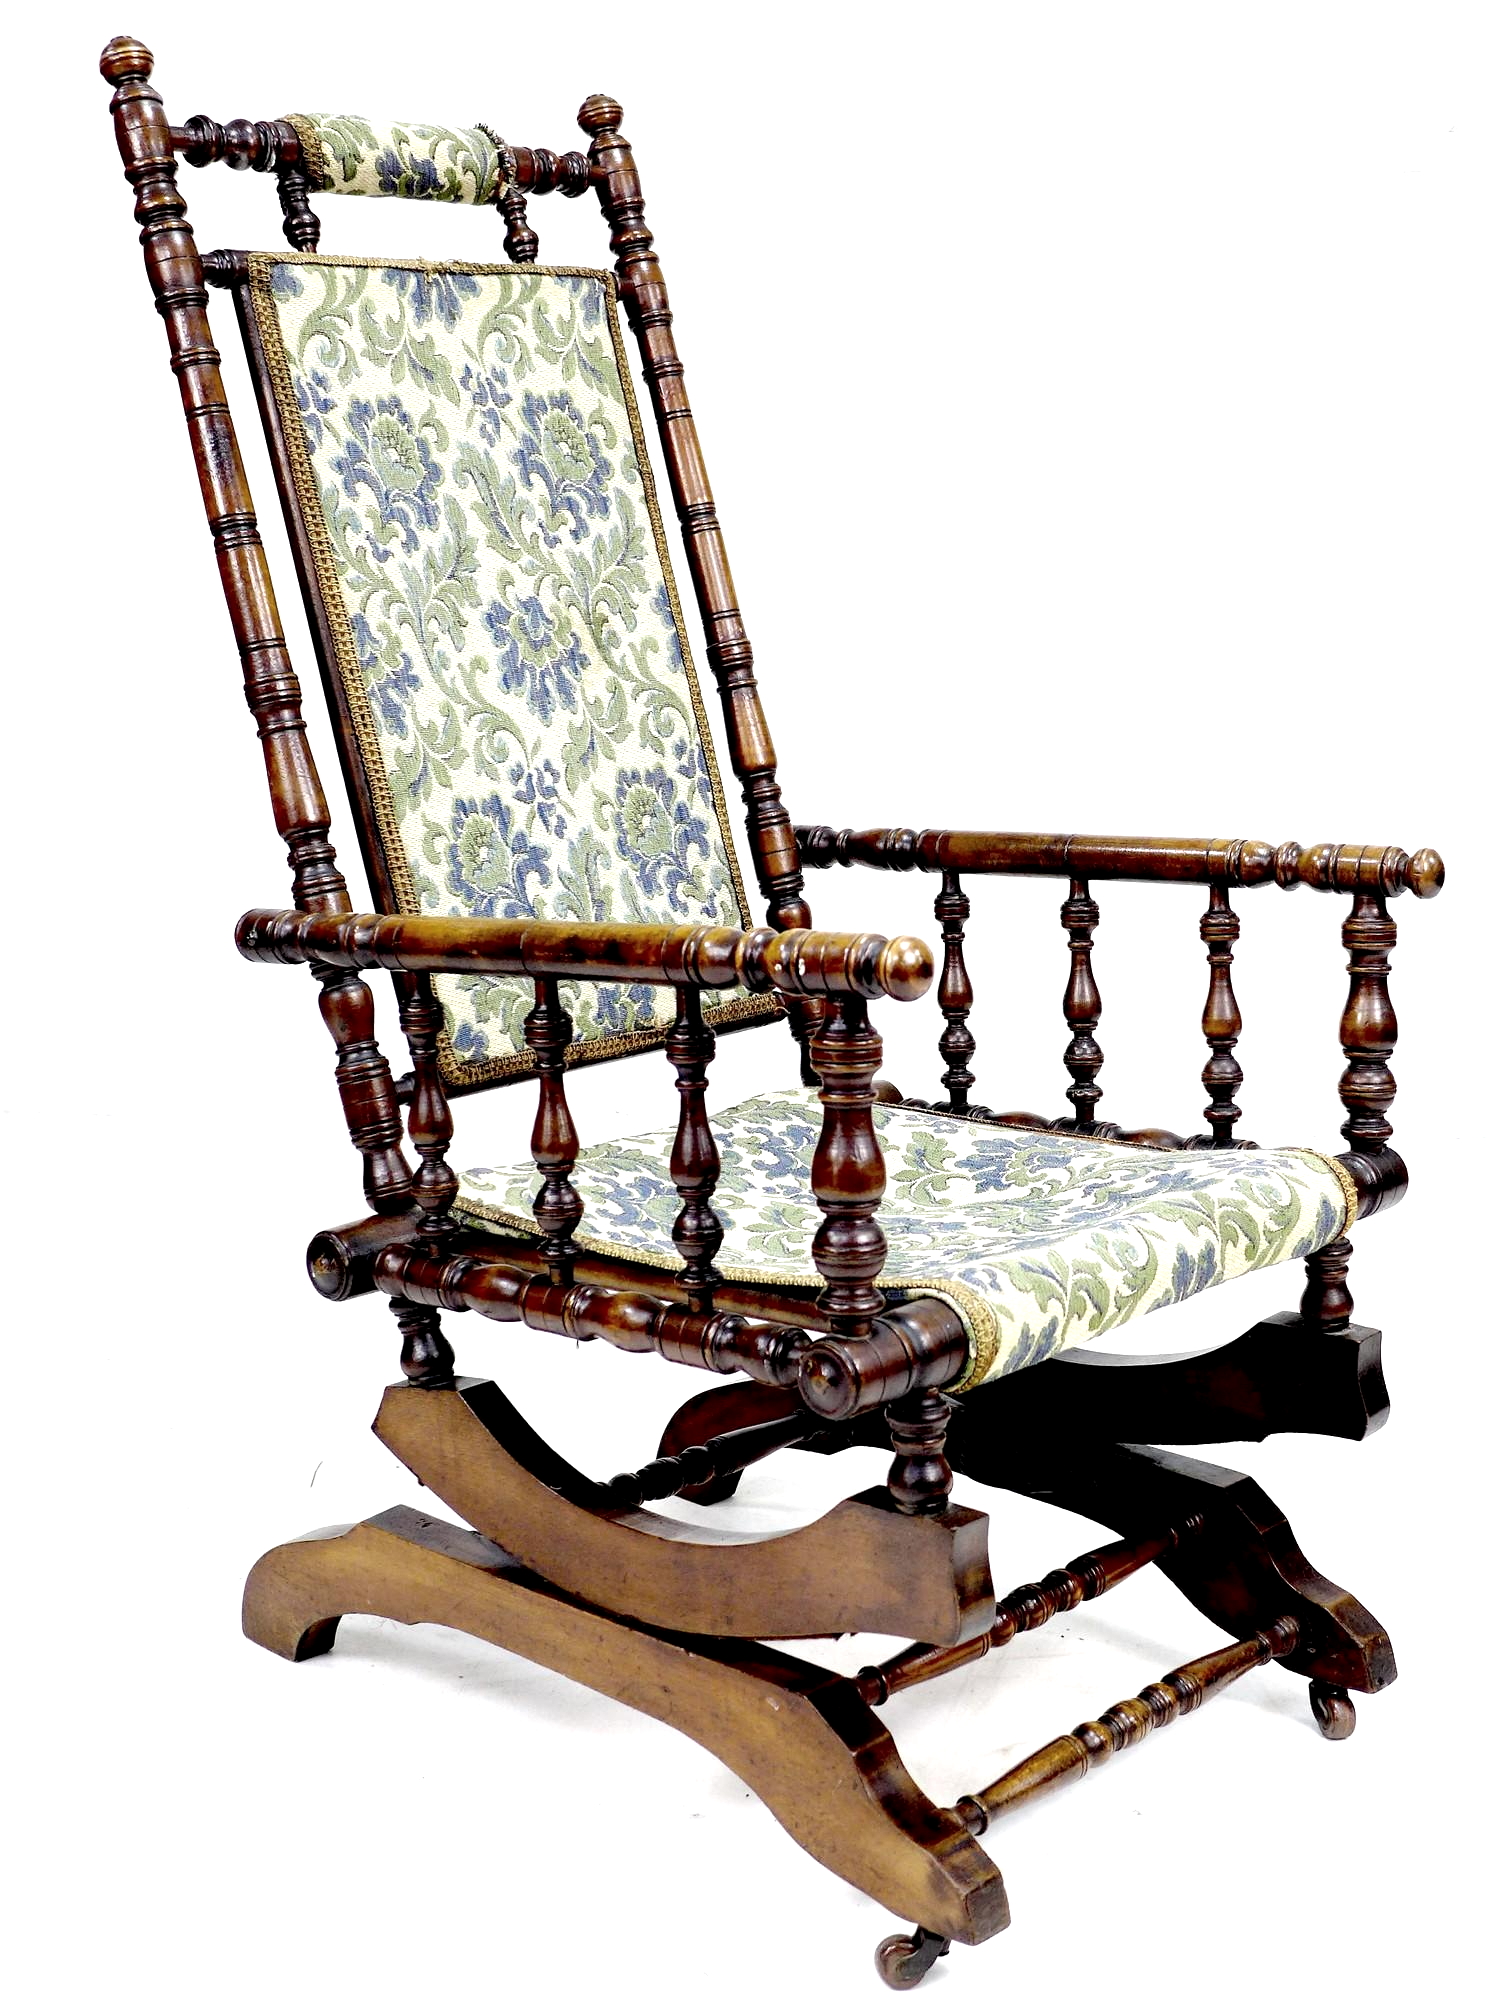 An American rocking chair, wooden turned spindle frame, metal sprung rocking action, floral